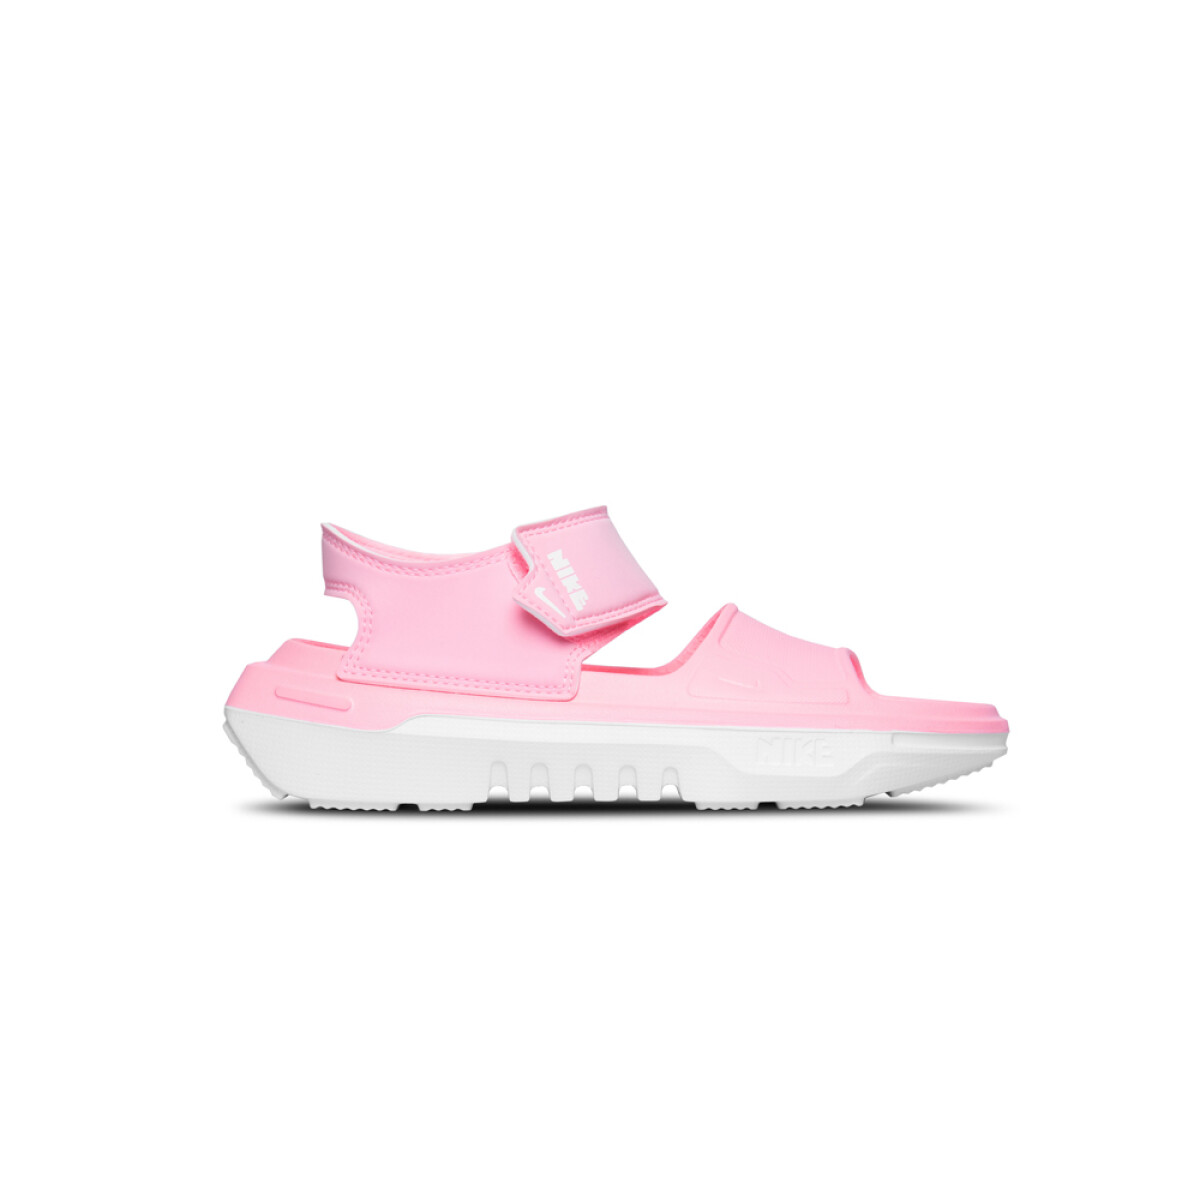 Nike Playscape BG - Pink 